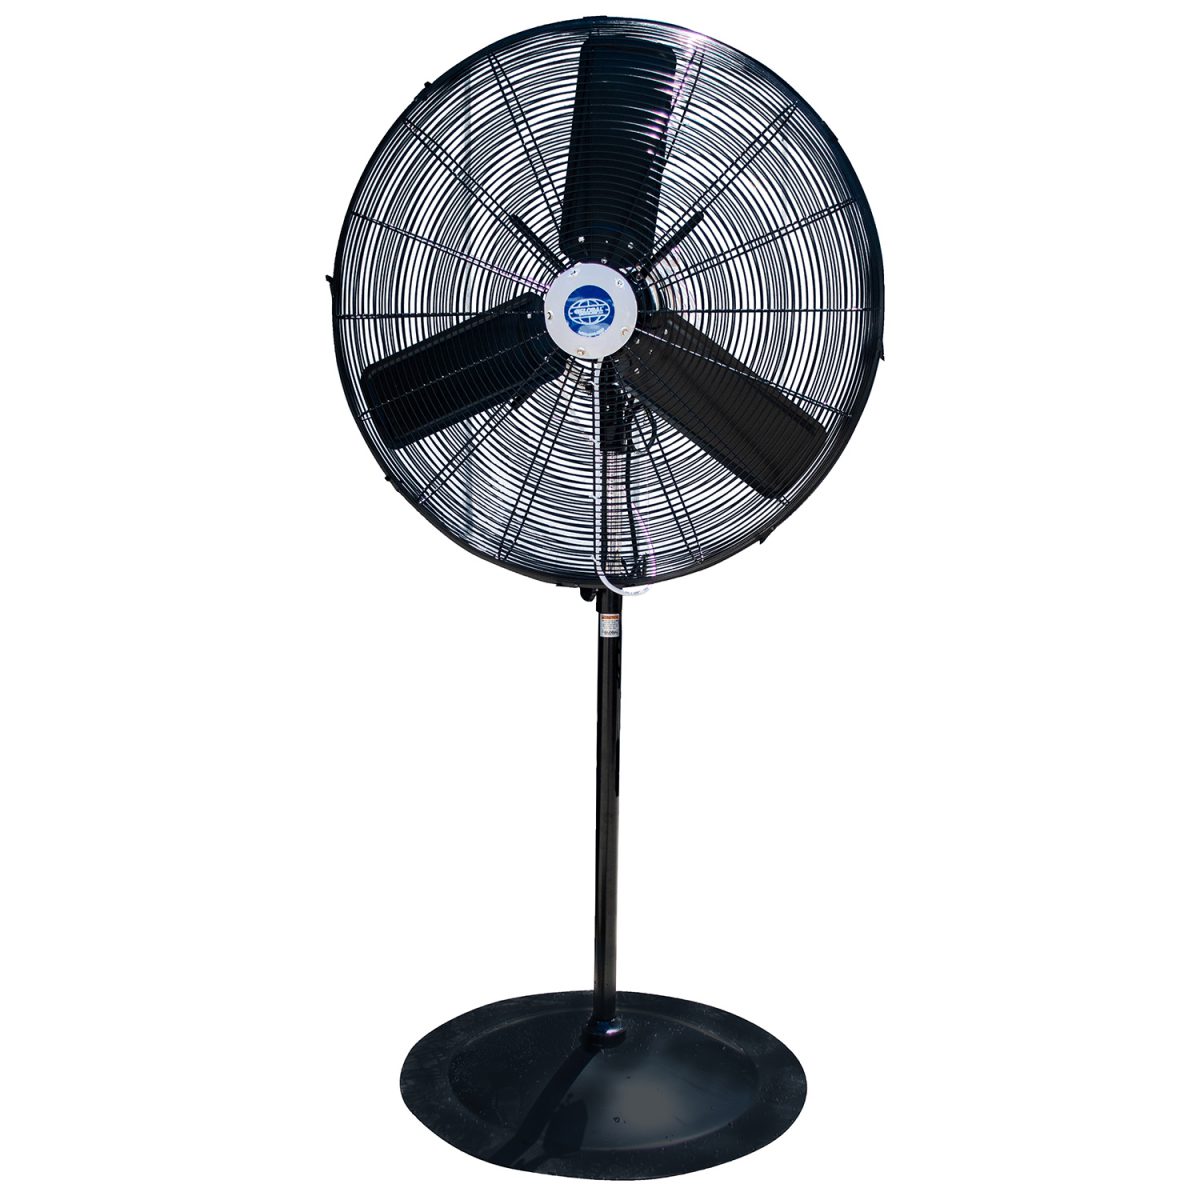 Oscillating fan with misters